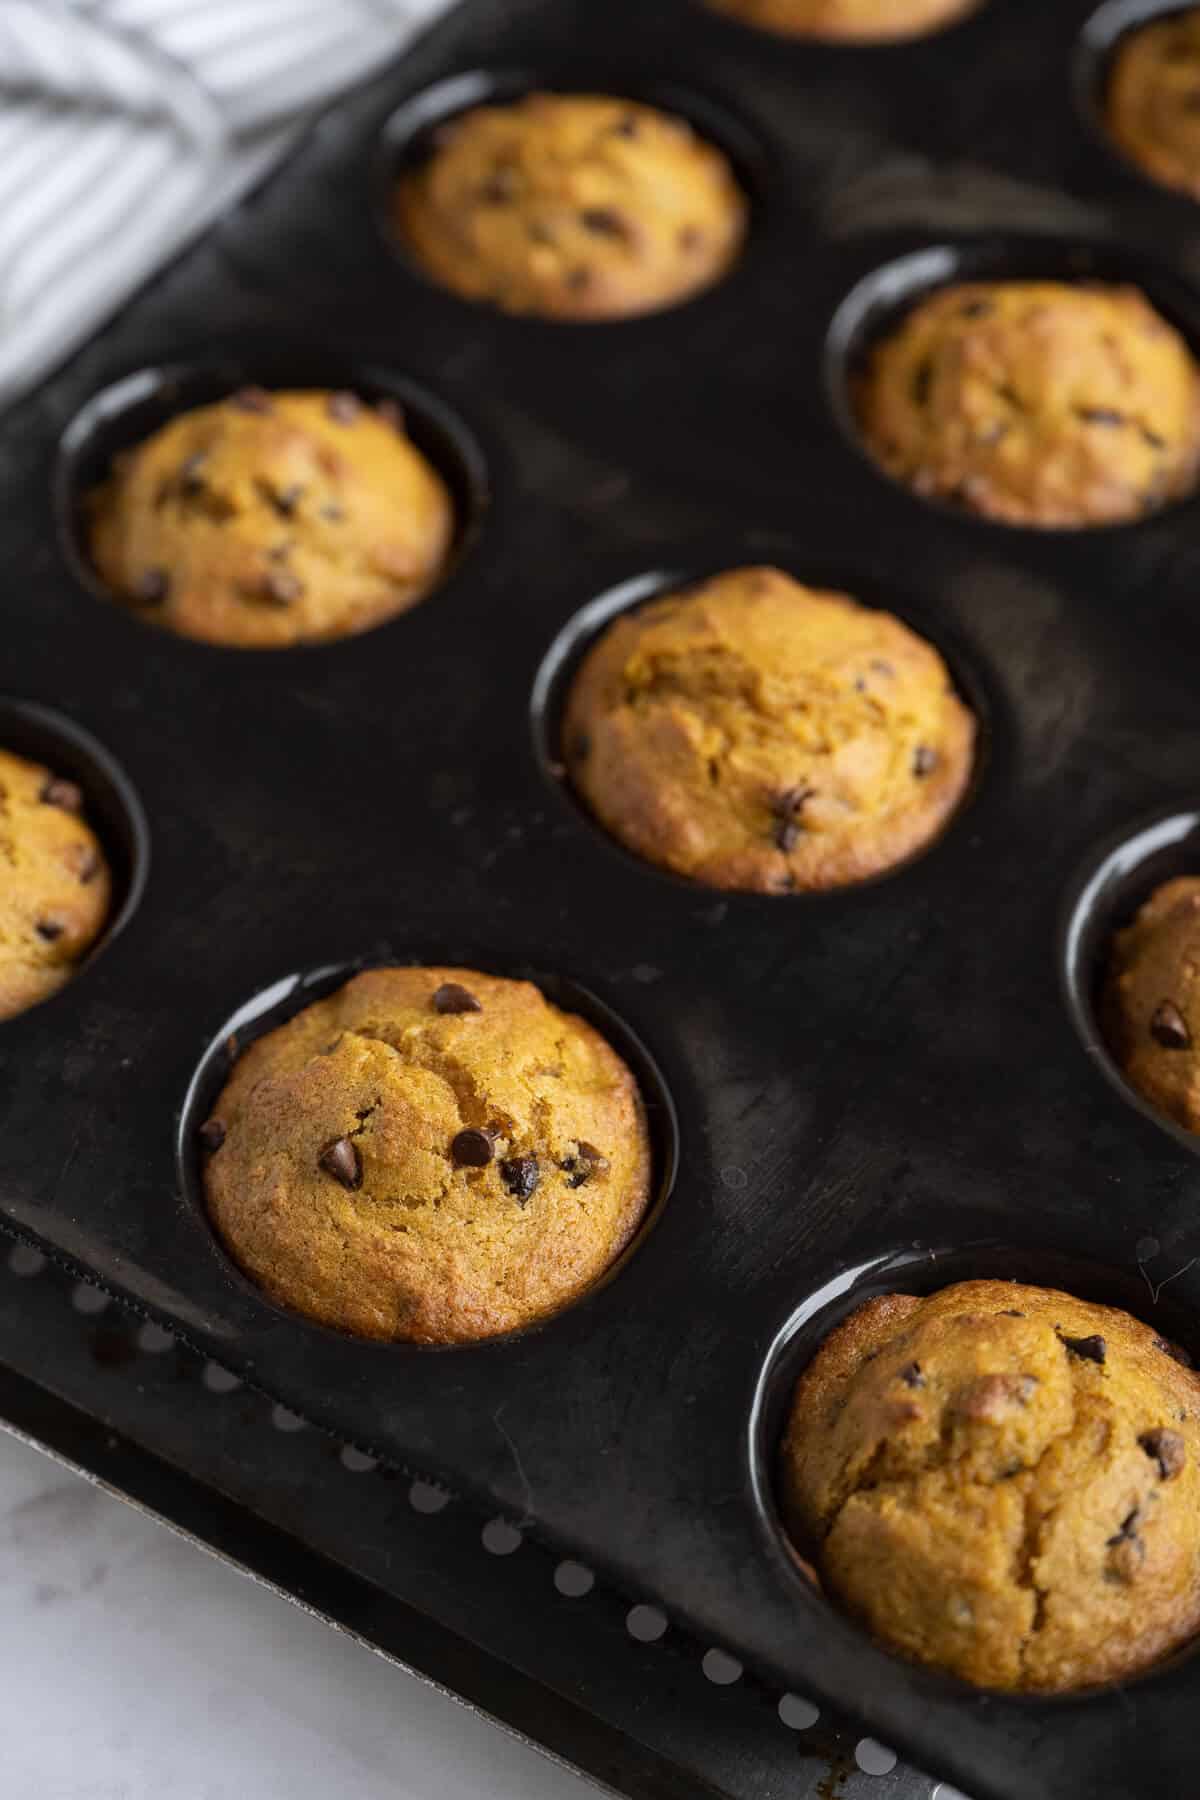 Freshly baked Pumpkin Muffins with Chocolate Chips still in the pan.